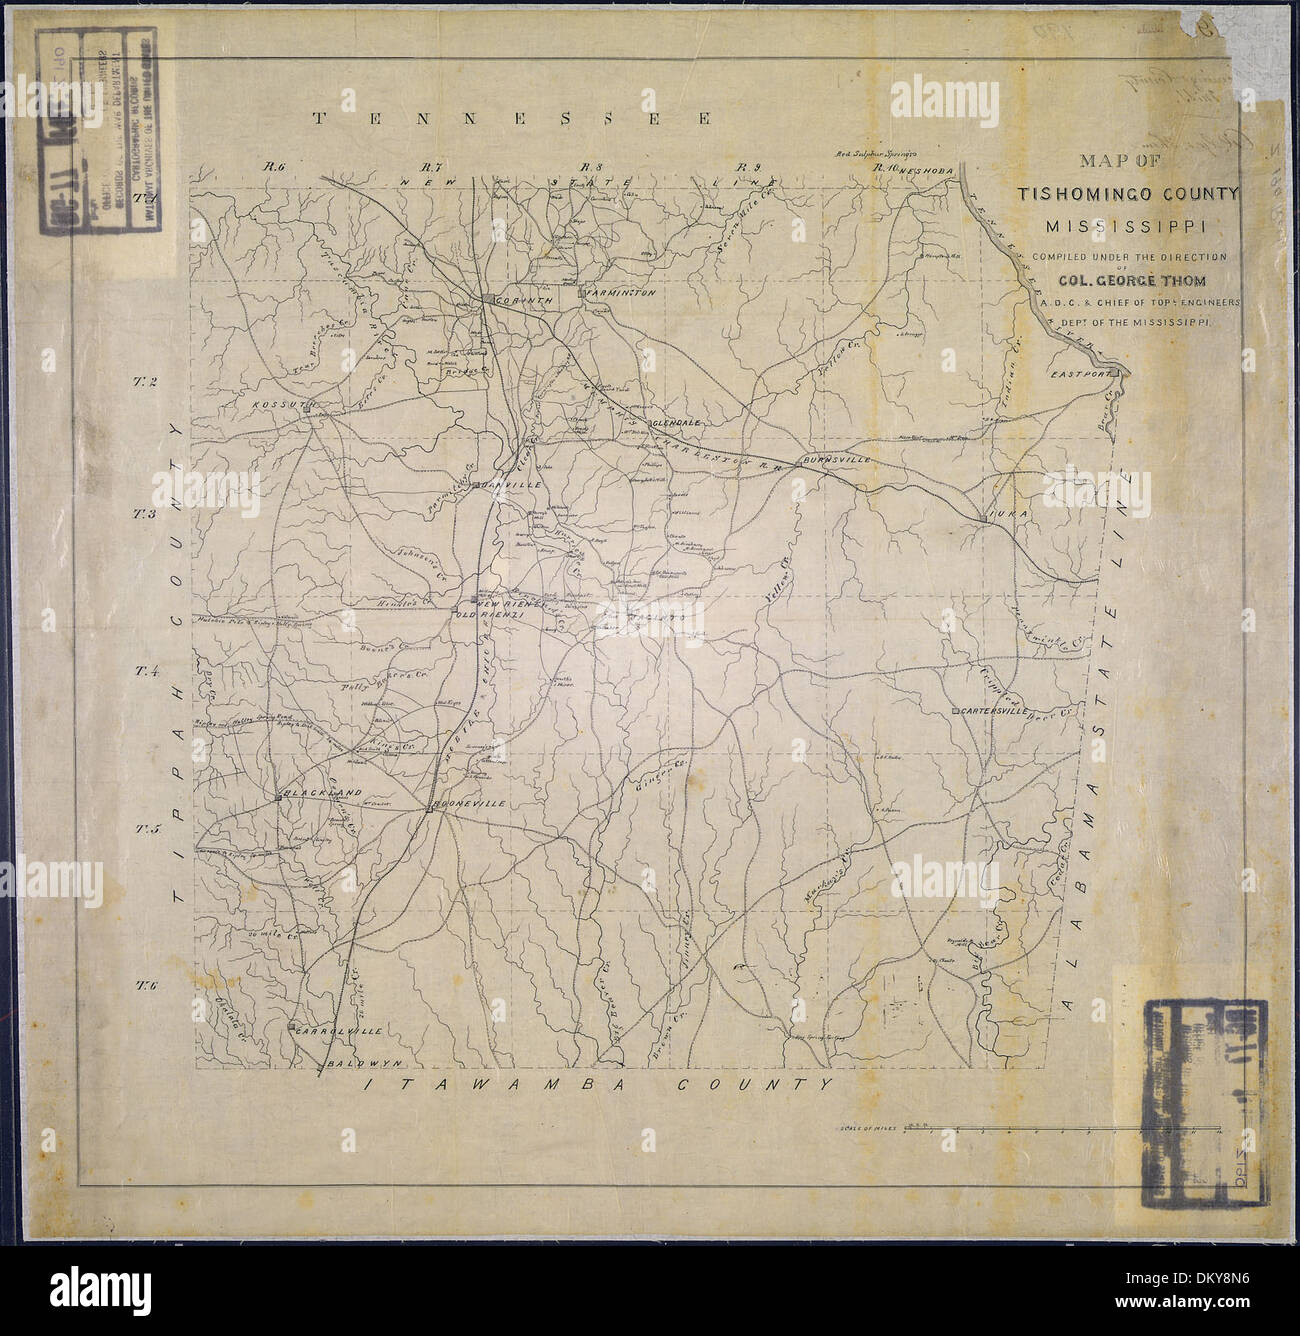 Map of Tishomingo County, Mississippi. Compiled under the Direction of ...